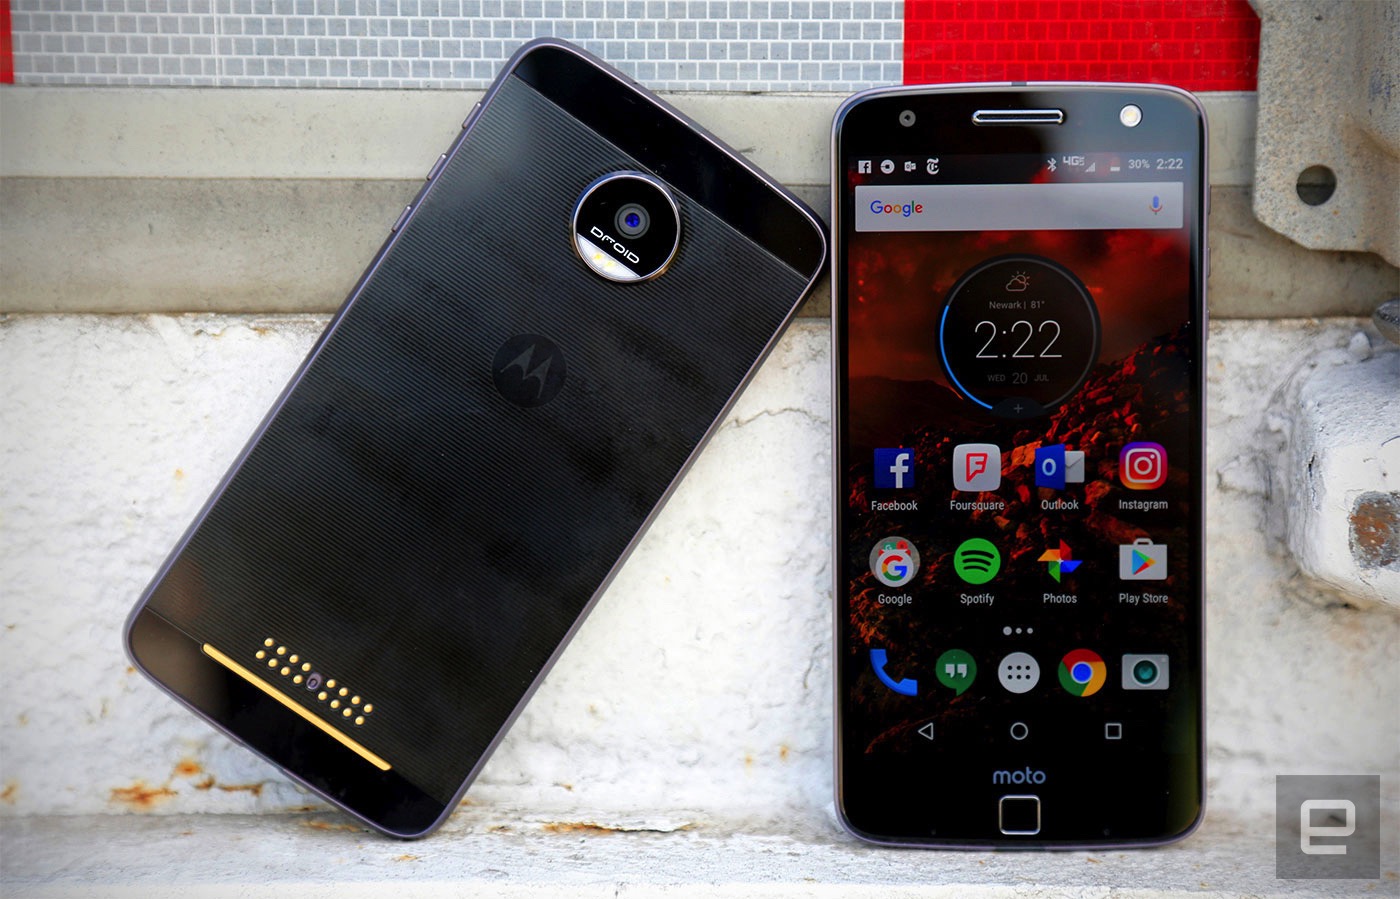 Moto Z and Z Force Droid review: The risks are mostly worth it